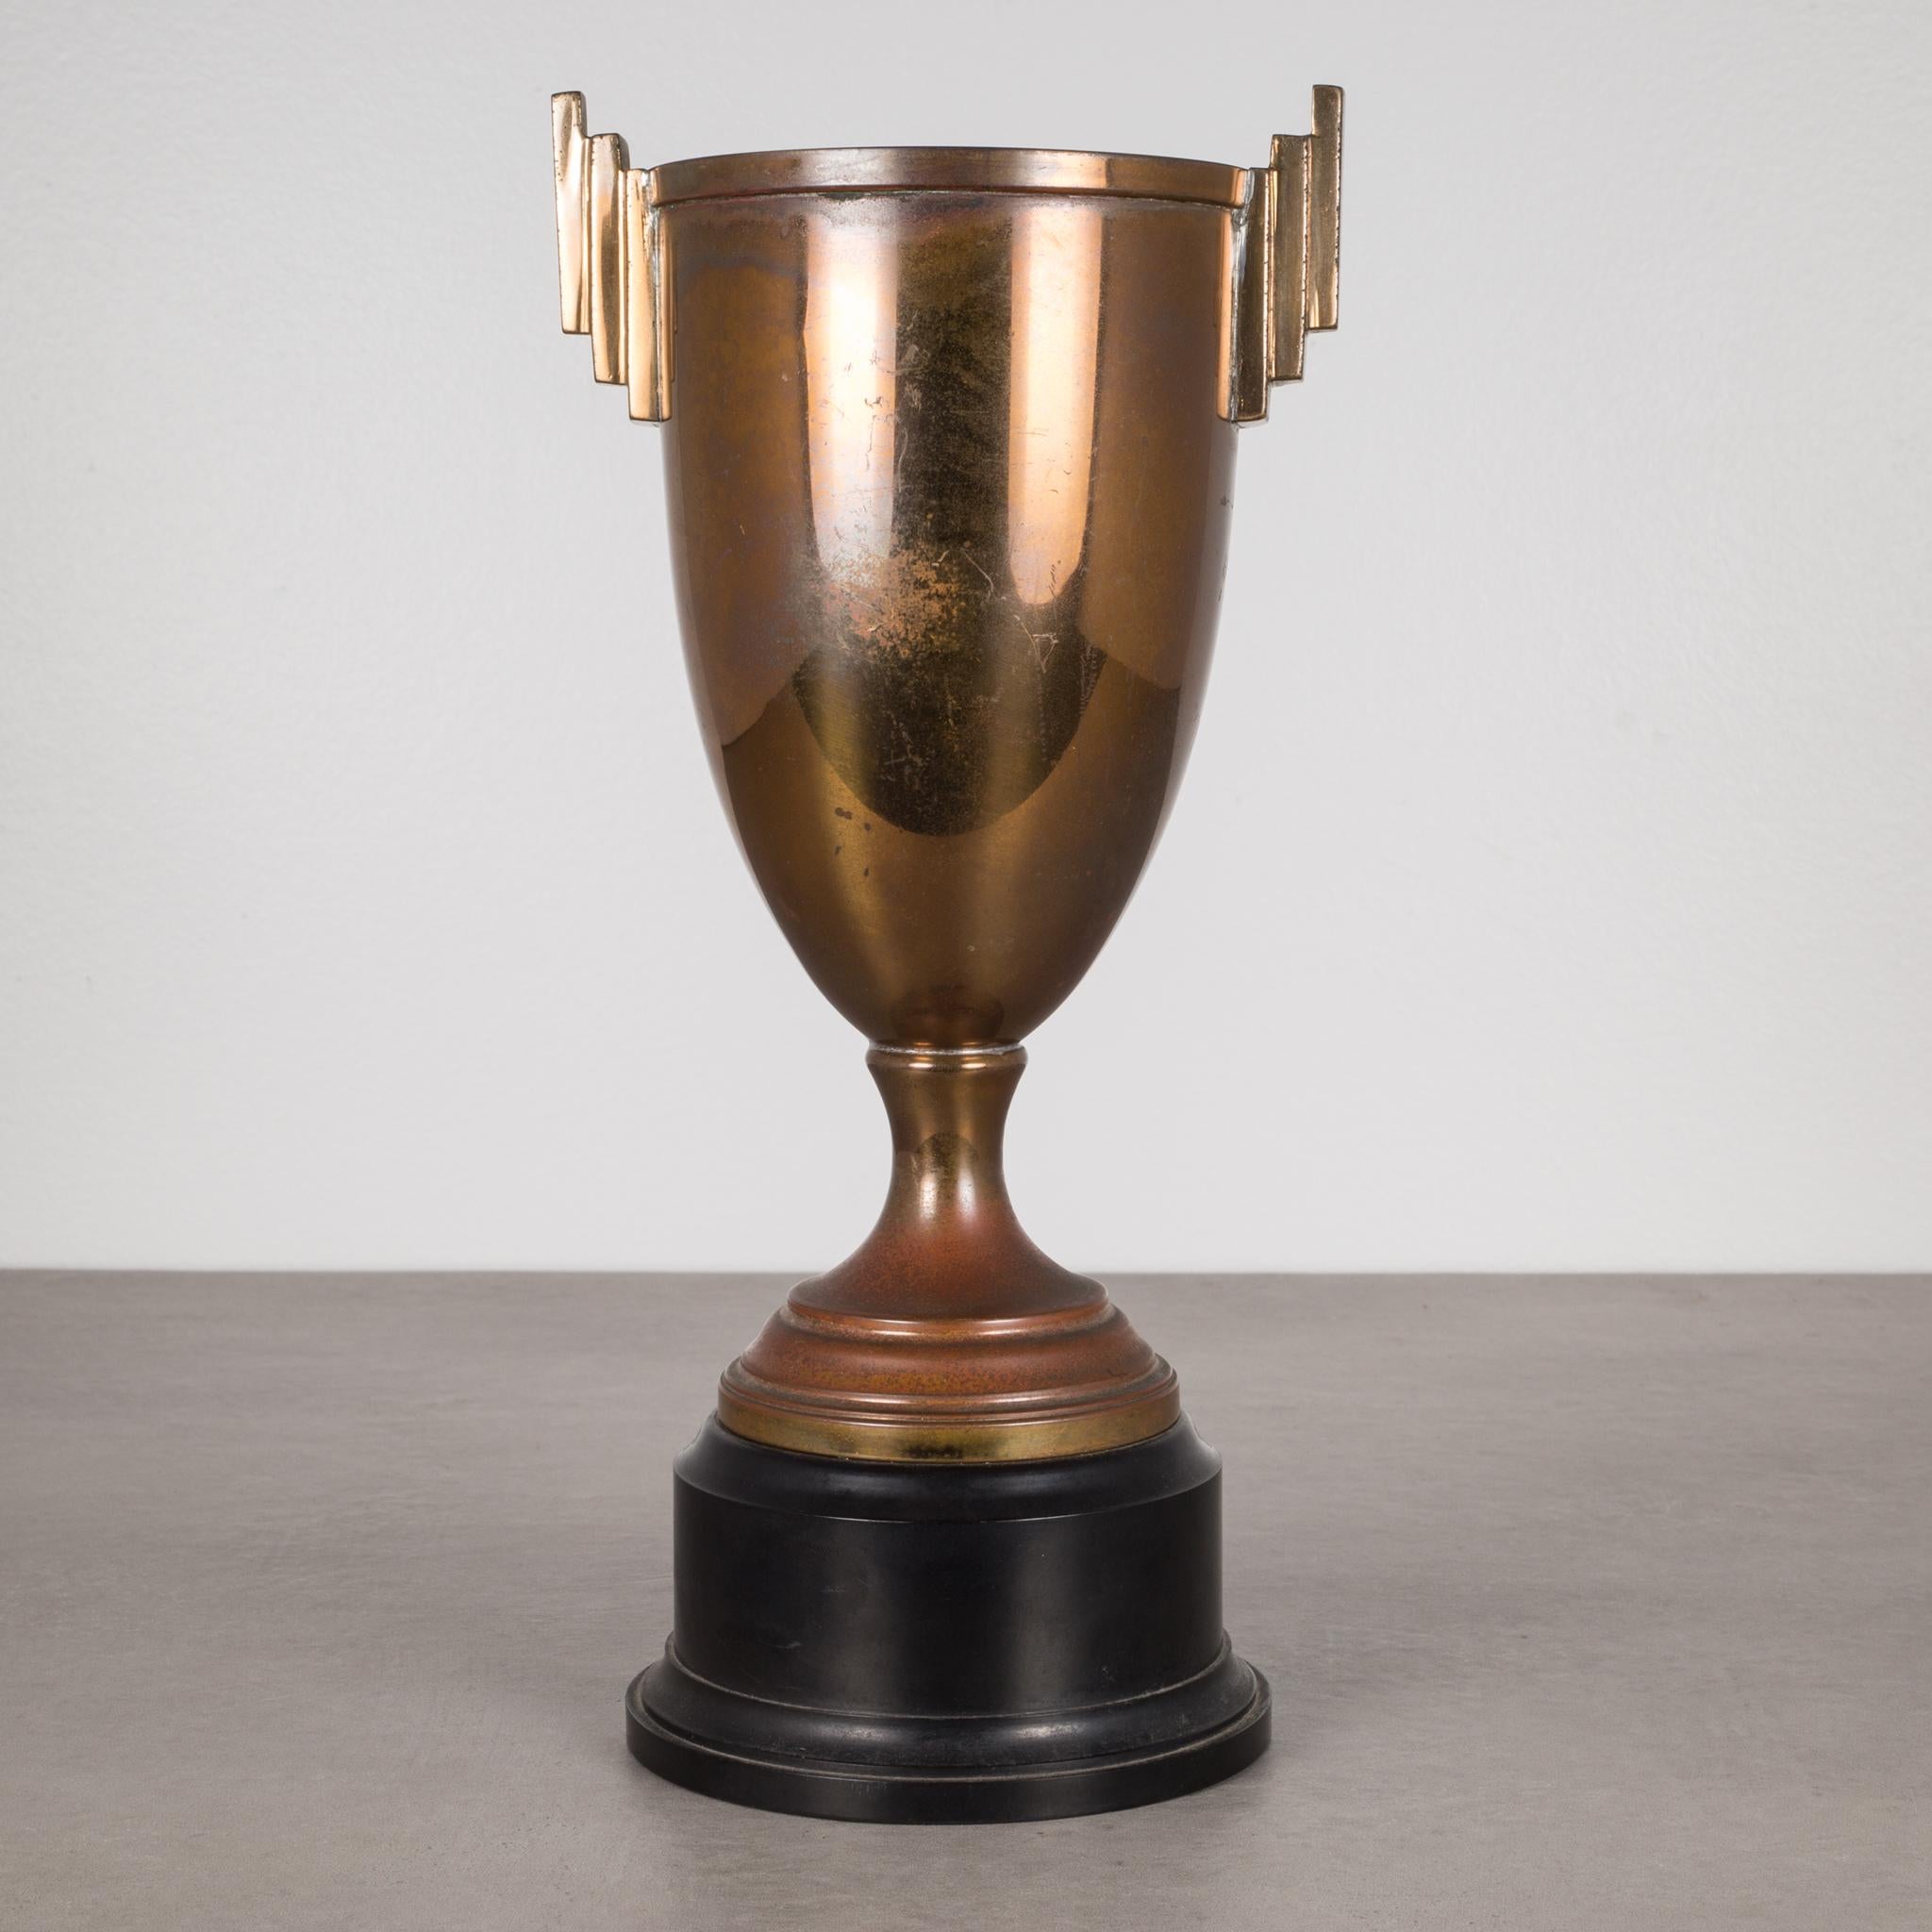 American Brass Plated Trophy Cup San Frnacisco Yacht Club c. 1930s